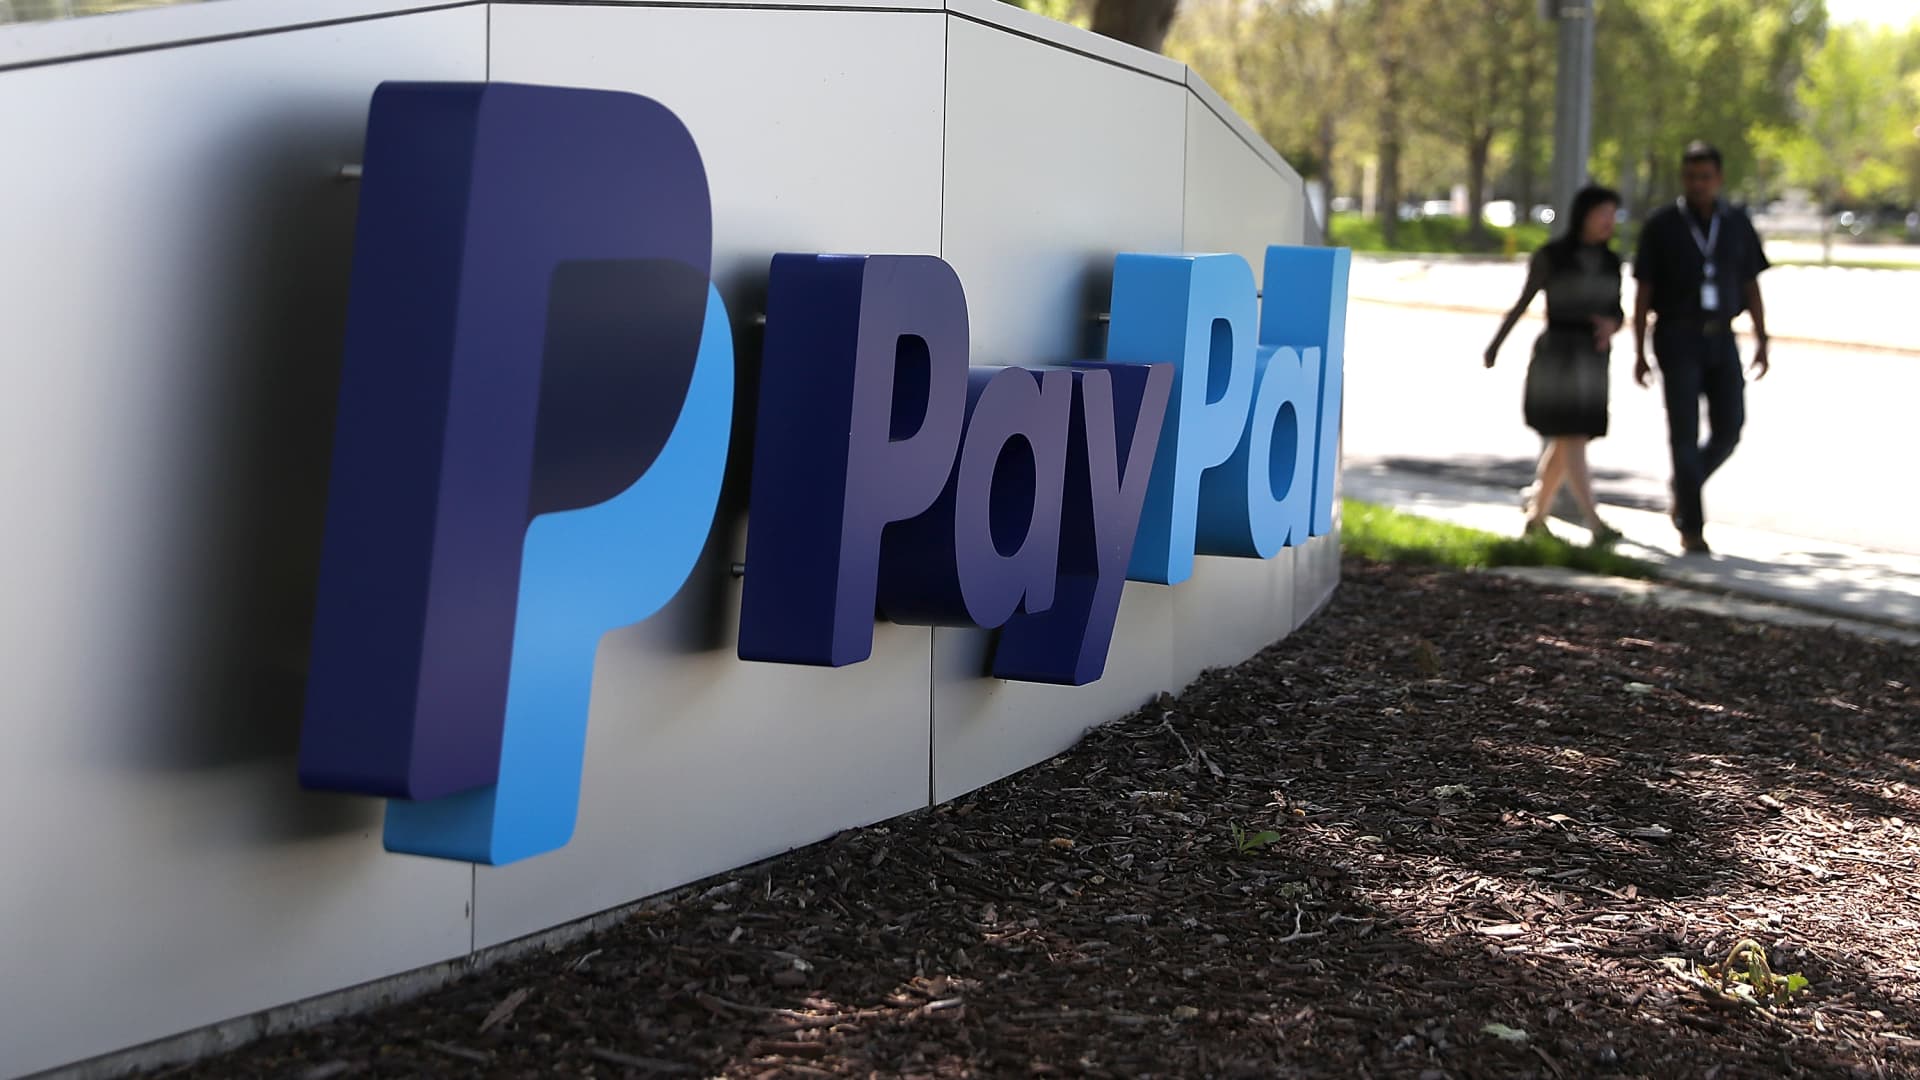 Stocks making the biggest moves after hours: PayPal, Airbnb, Match Group, Caesars and more